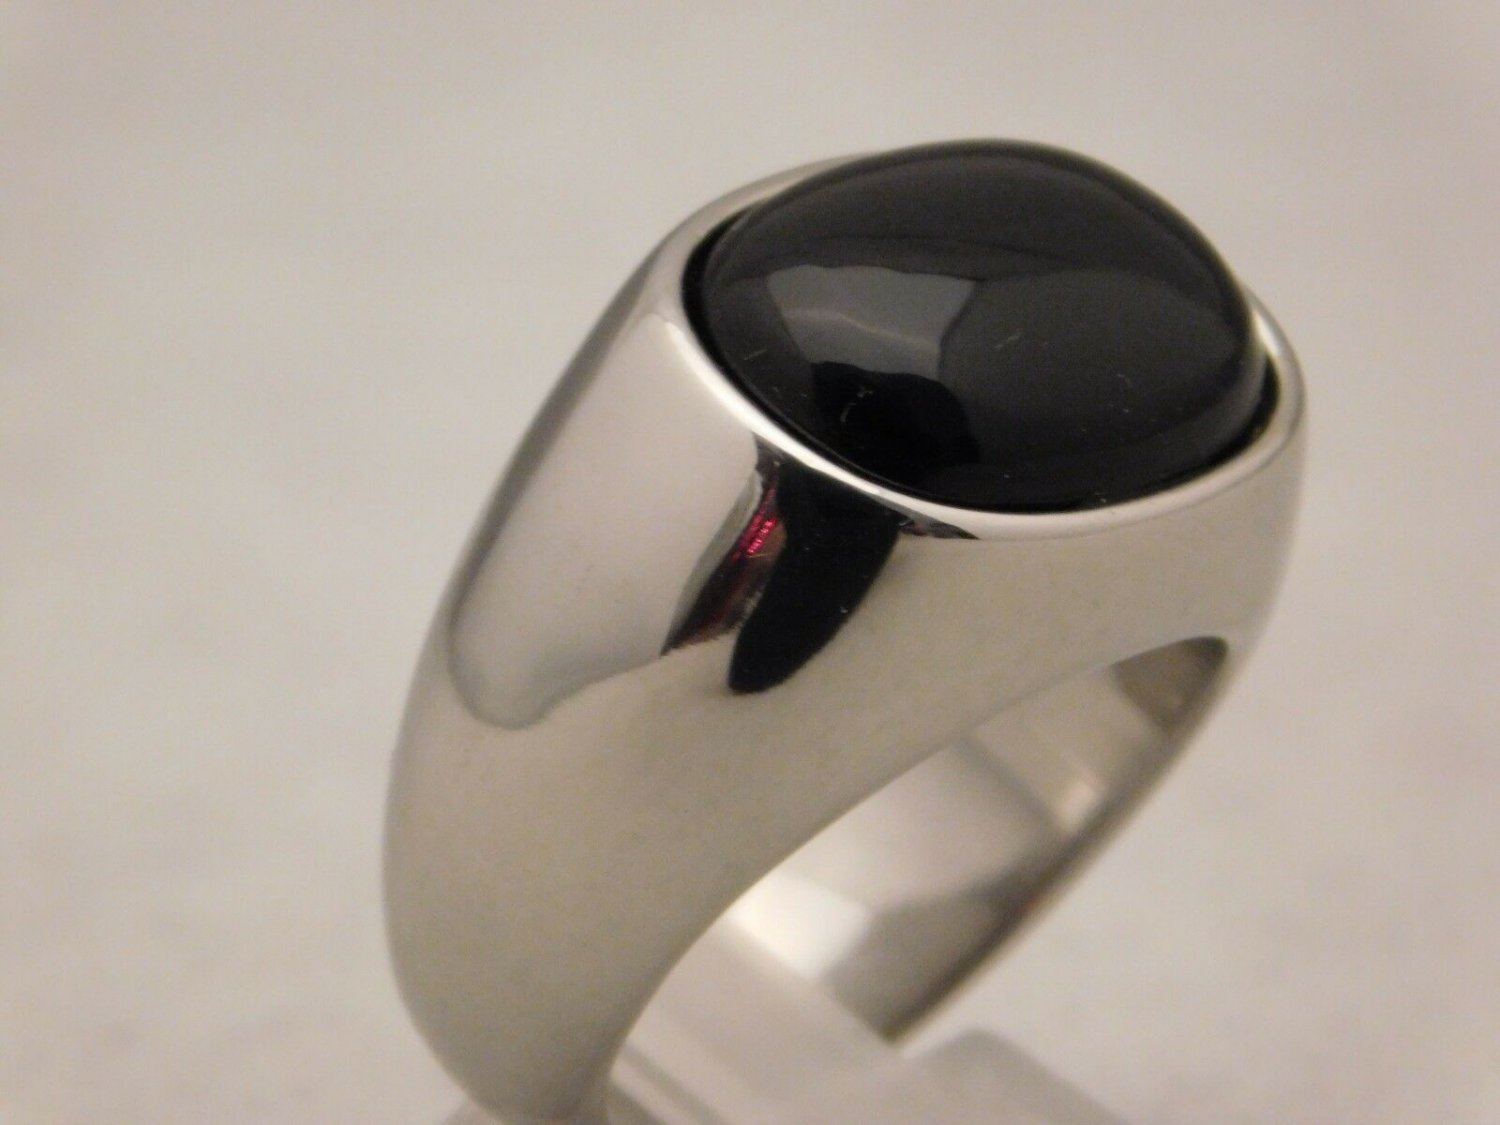 Black Onyx Mens Ring In Stylish Stainless Steel Setting....Size 11